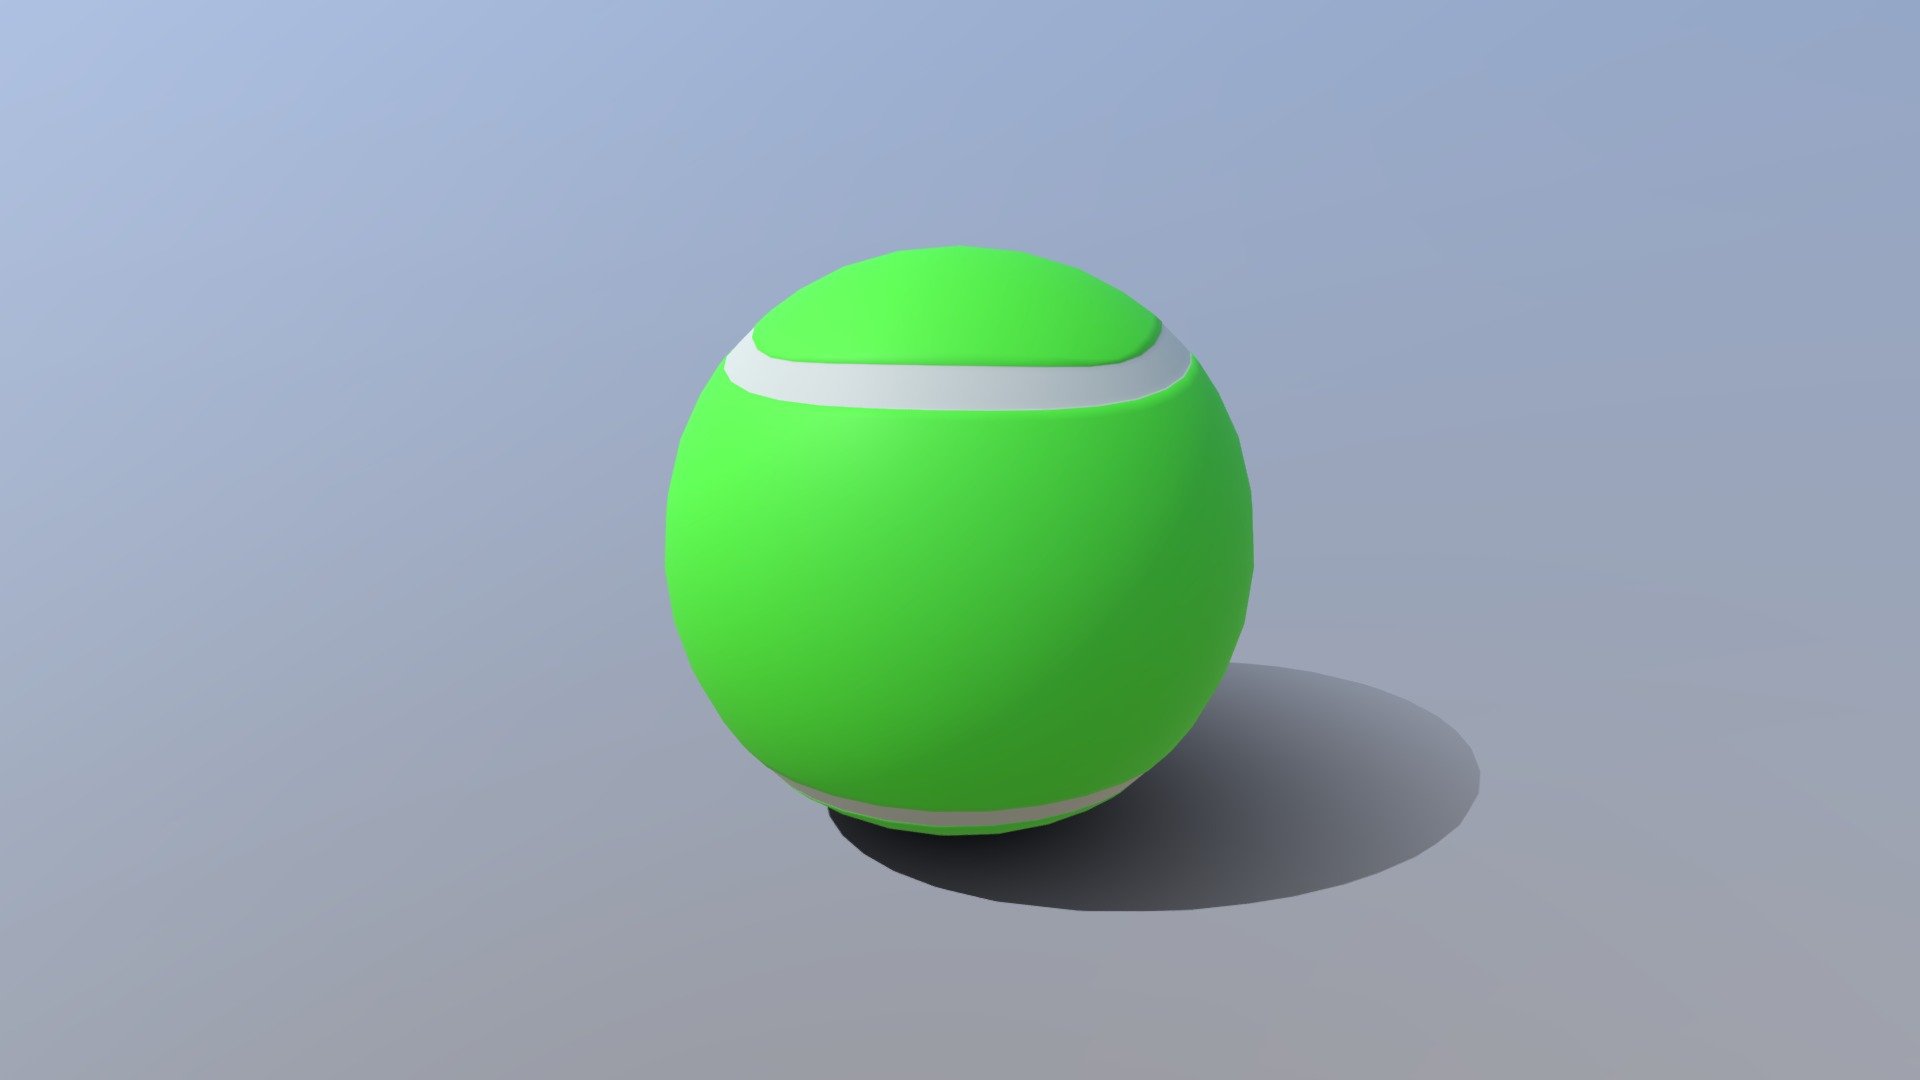 This is a 3d model of a tennis ball. The tennis ball was modelled and prepared for cartoon style renderings, background, general CG visualization etc.

The 3d ball model is presented as a mesh with quads only.

Verts : 1.026 Faces: 1.024

PLEASE NOTE The Fur material is only available for the native file format Blender. All exchange formats are without fur.

Simple diffuse colors.

No ring, maps and no UVW mapping is available.

The original file was created in blender. You will receive a 3DS, OBJ, FBX, blend, DAE, Stl.

All preview images were rendered with Blender Cycles. Product is ready to render out-of-the-box. Please note that the lights, cameras, and background is only included in the .blend file. The model is clean and alone in the other provided files, centred at origin and has real-world scale 3d model